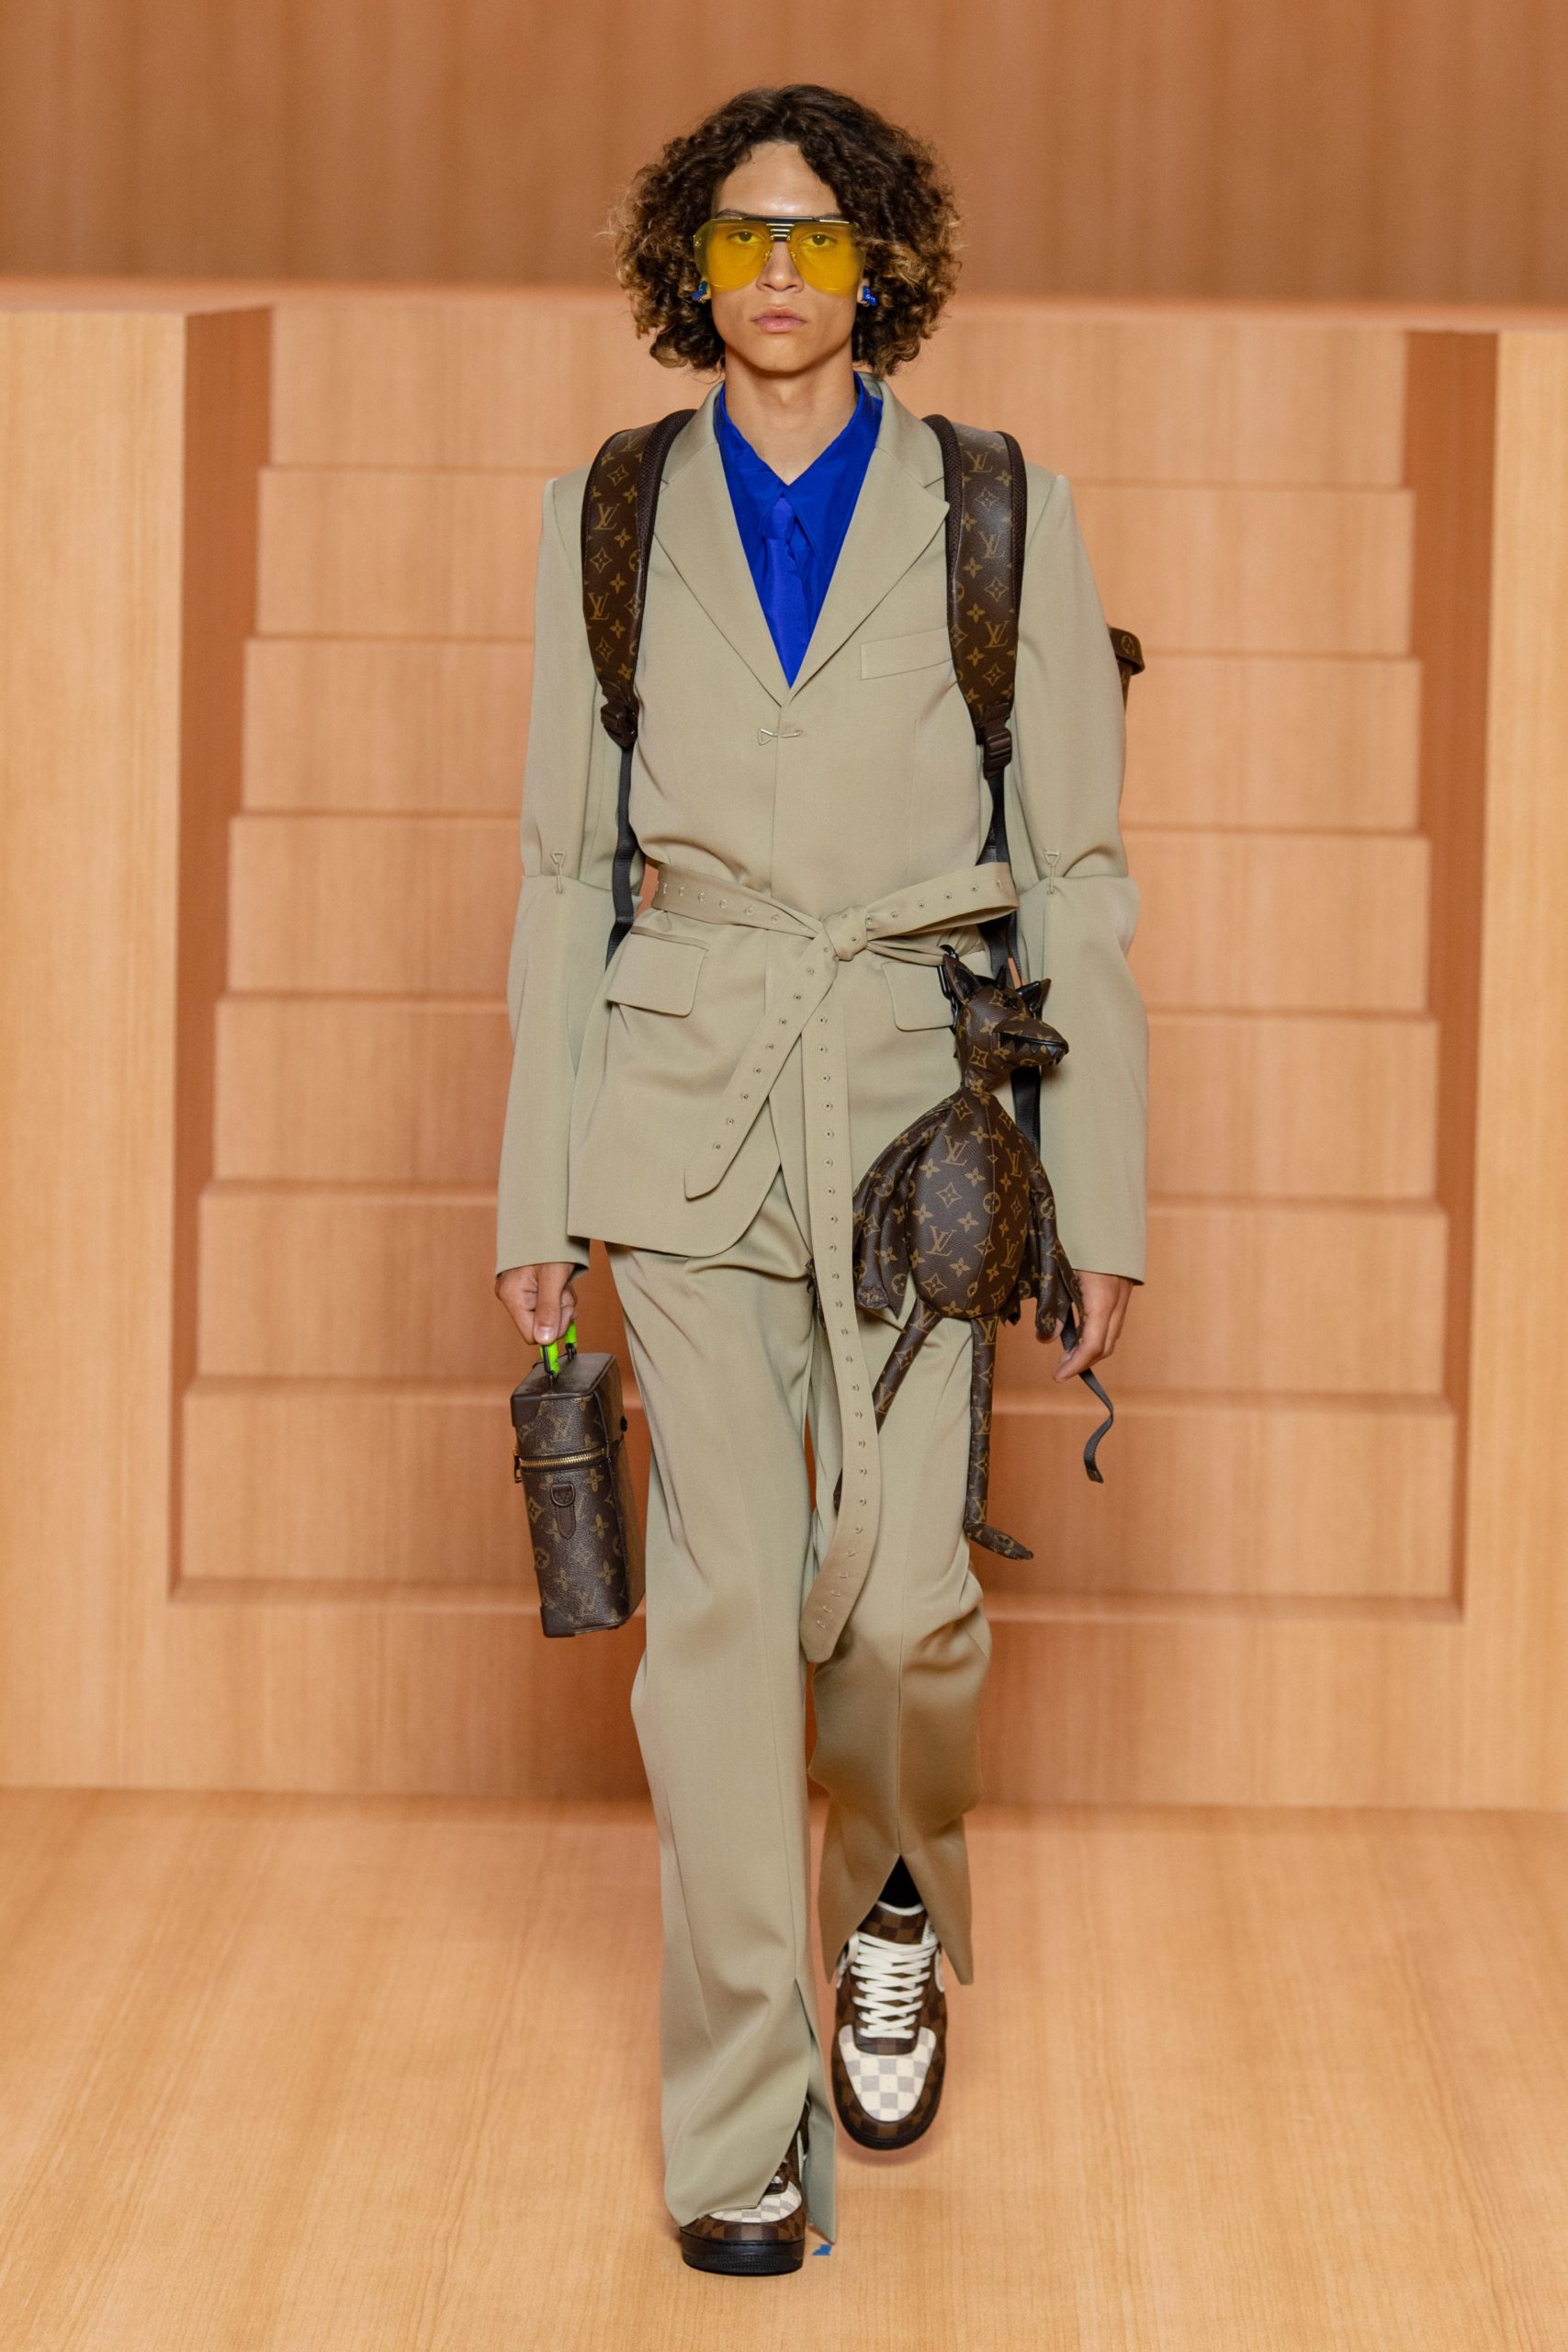 View the full Spring 2019 menswear collection from Louis Vuitton.